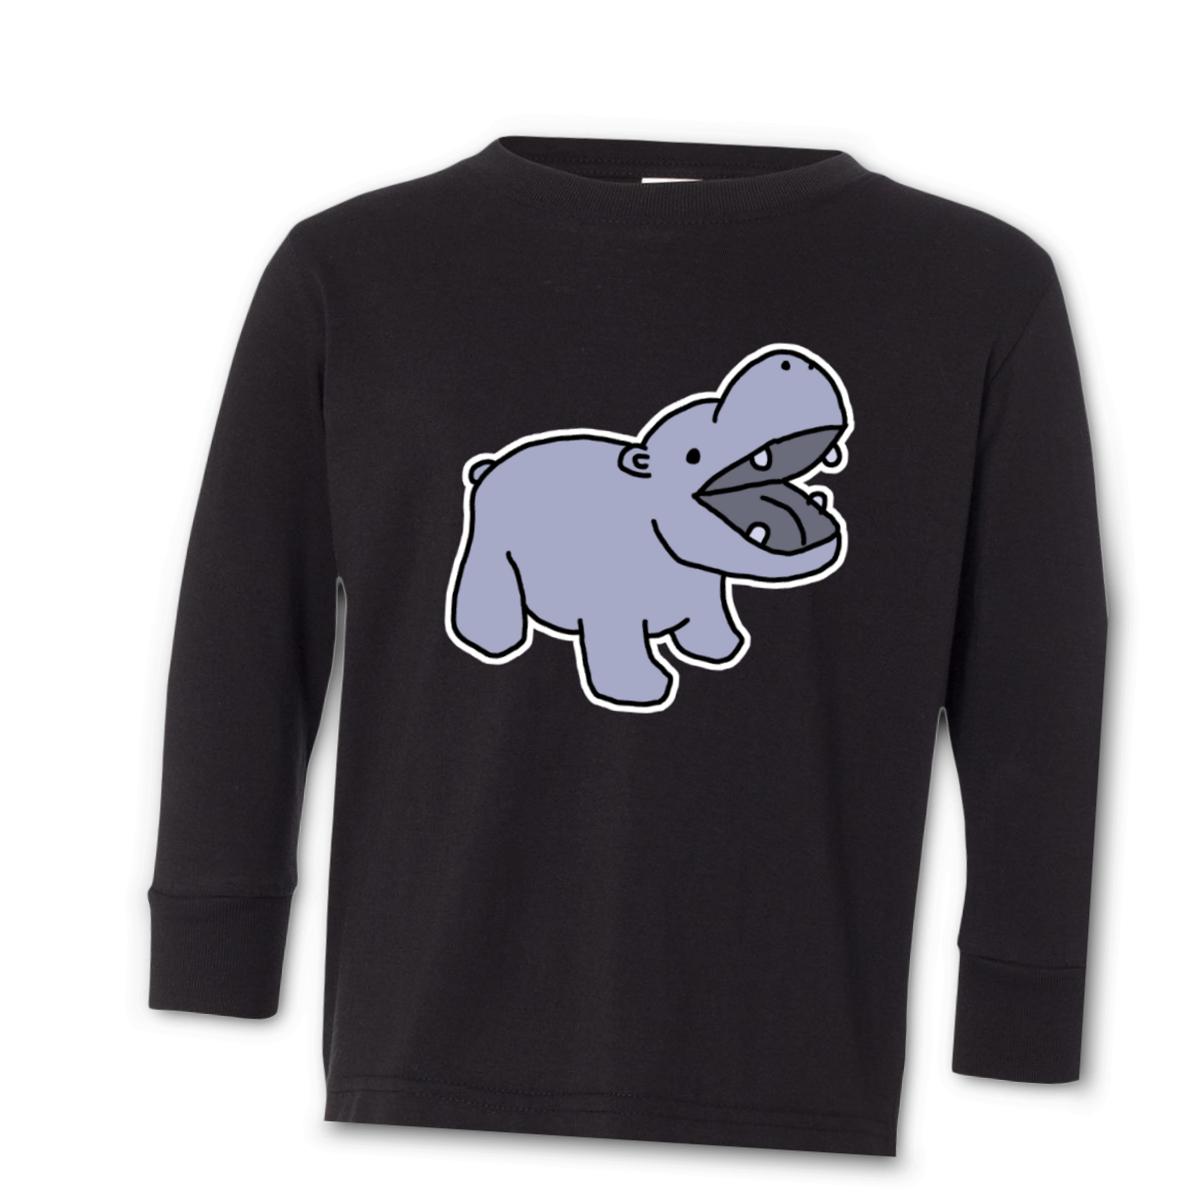 Toy Hippo Toddler Long Sleeve Tee 2T black